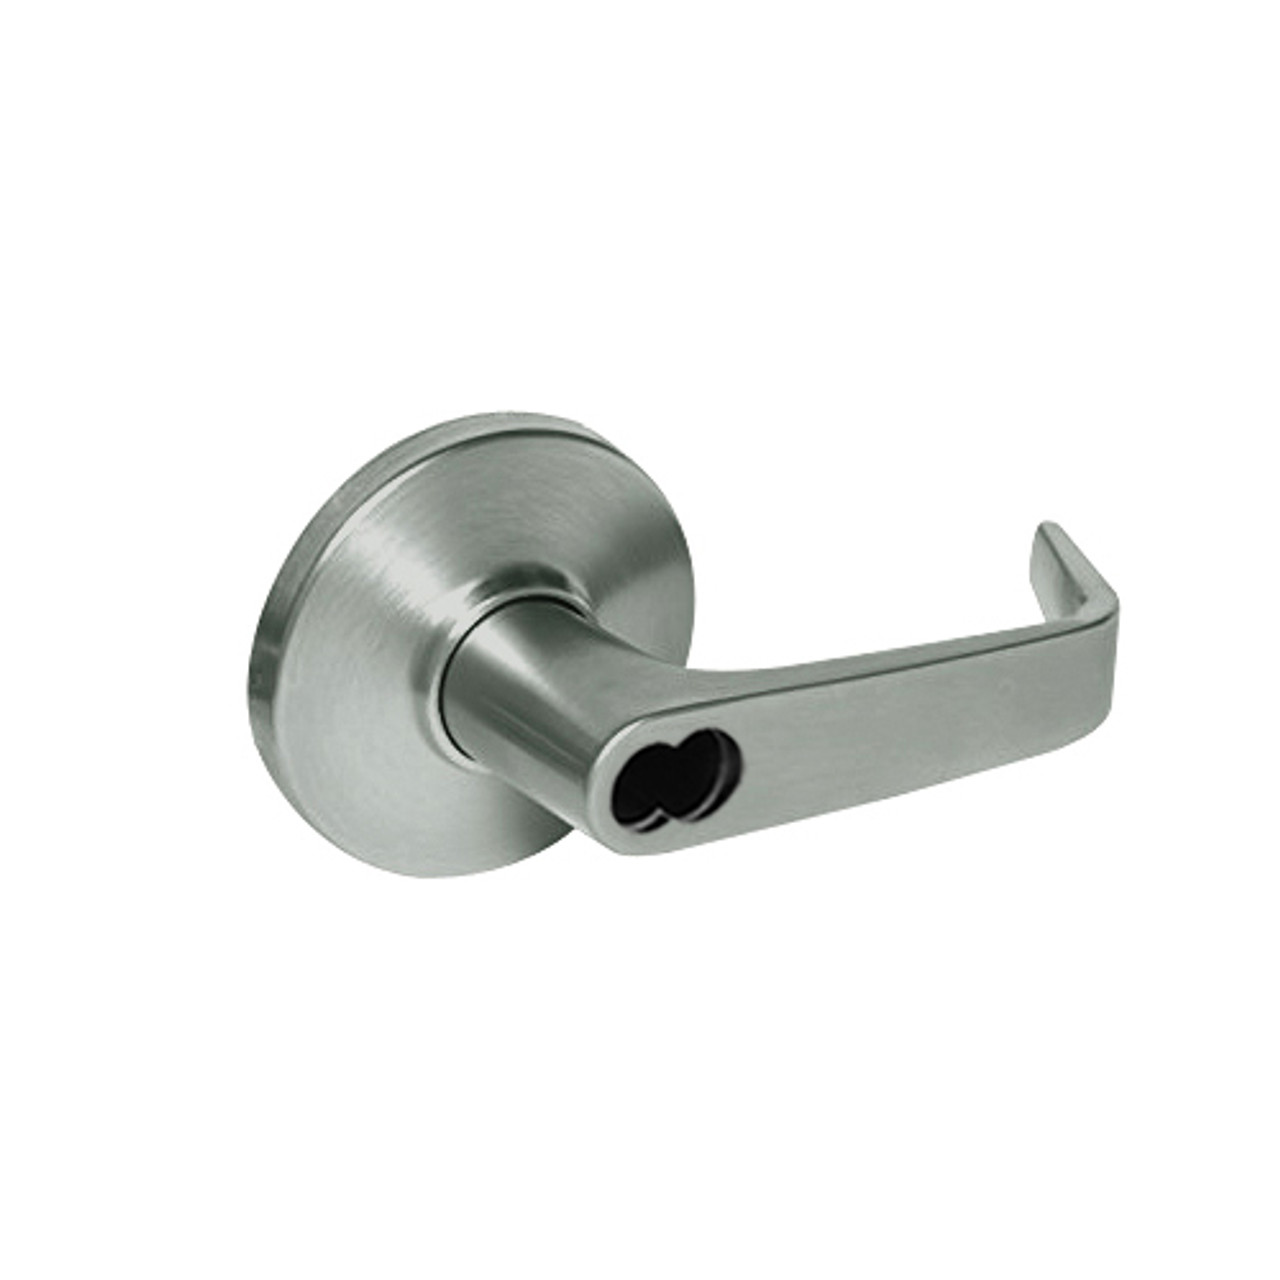 9K37R15DS3619 Best 9K Series Classroom Cylindrical Lever Locks with Contour Angle with Return Lever Design Accept 7 Pin Best Core in Satin Nickel